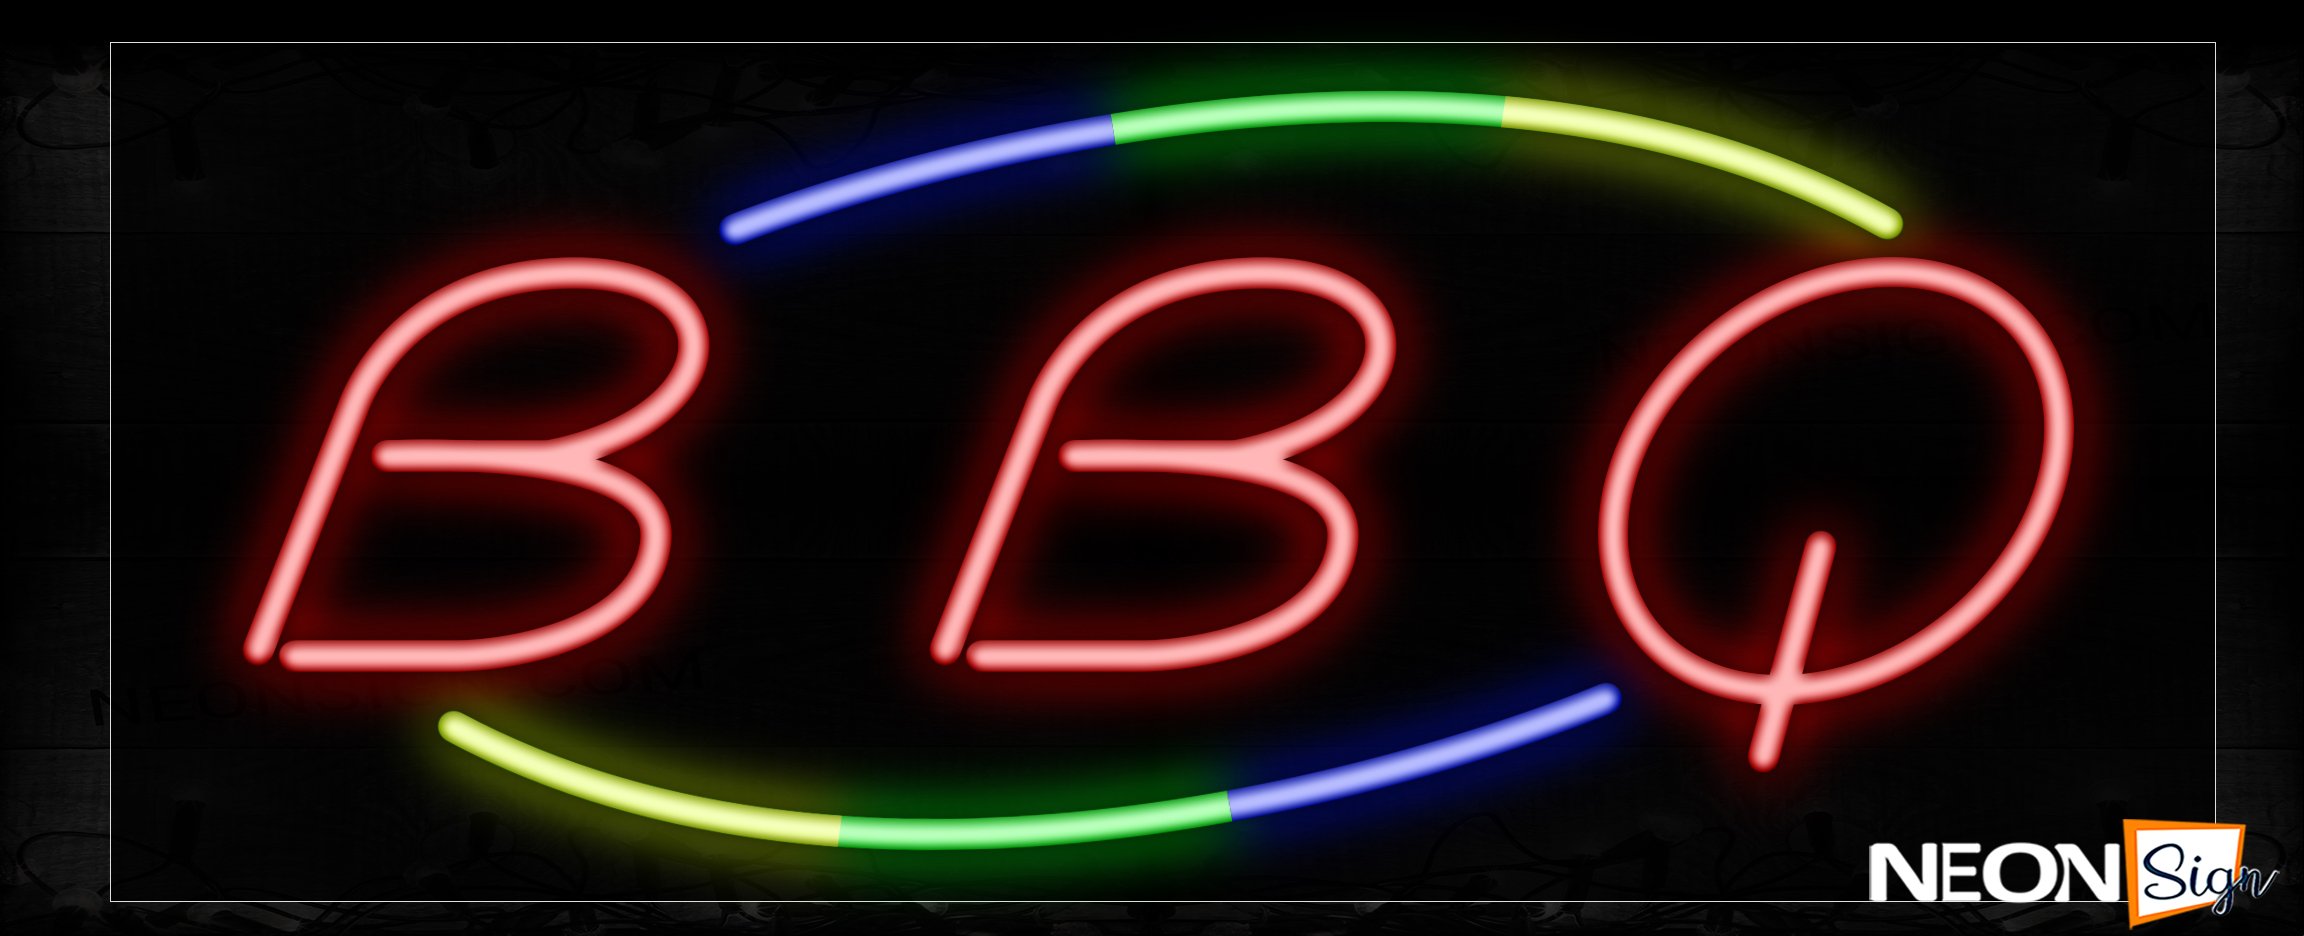 Image of 10740 B.B.Q In Red With Colorful Arc Border Neon Signs_13x32 Black Backing